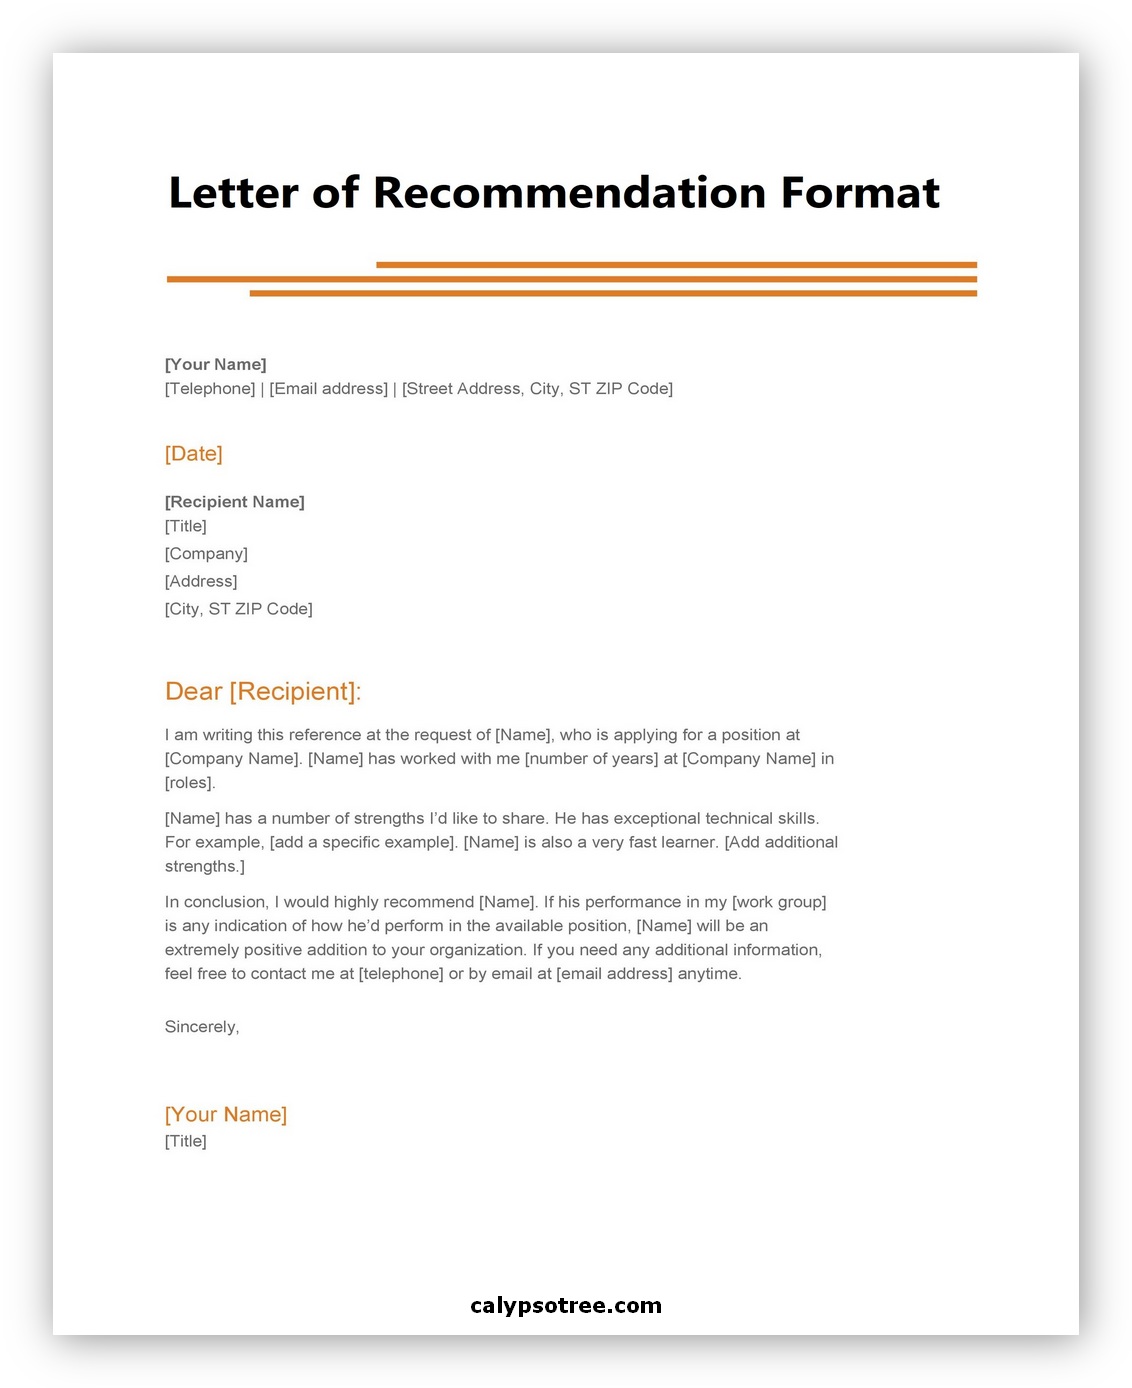 Letter of Recommendation Format 02